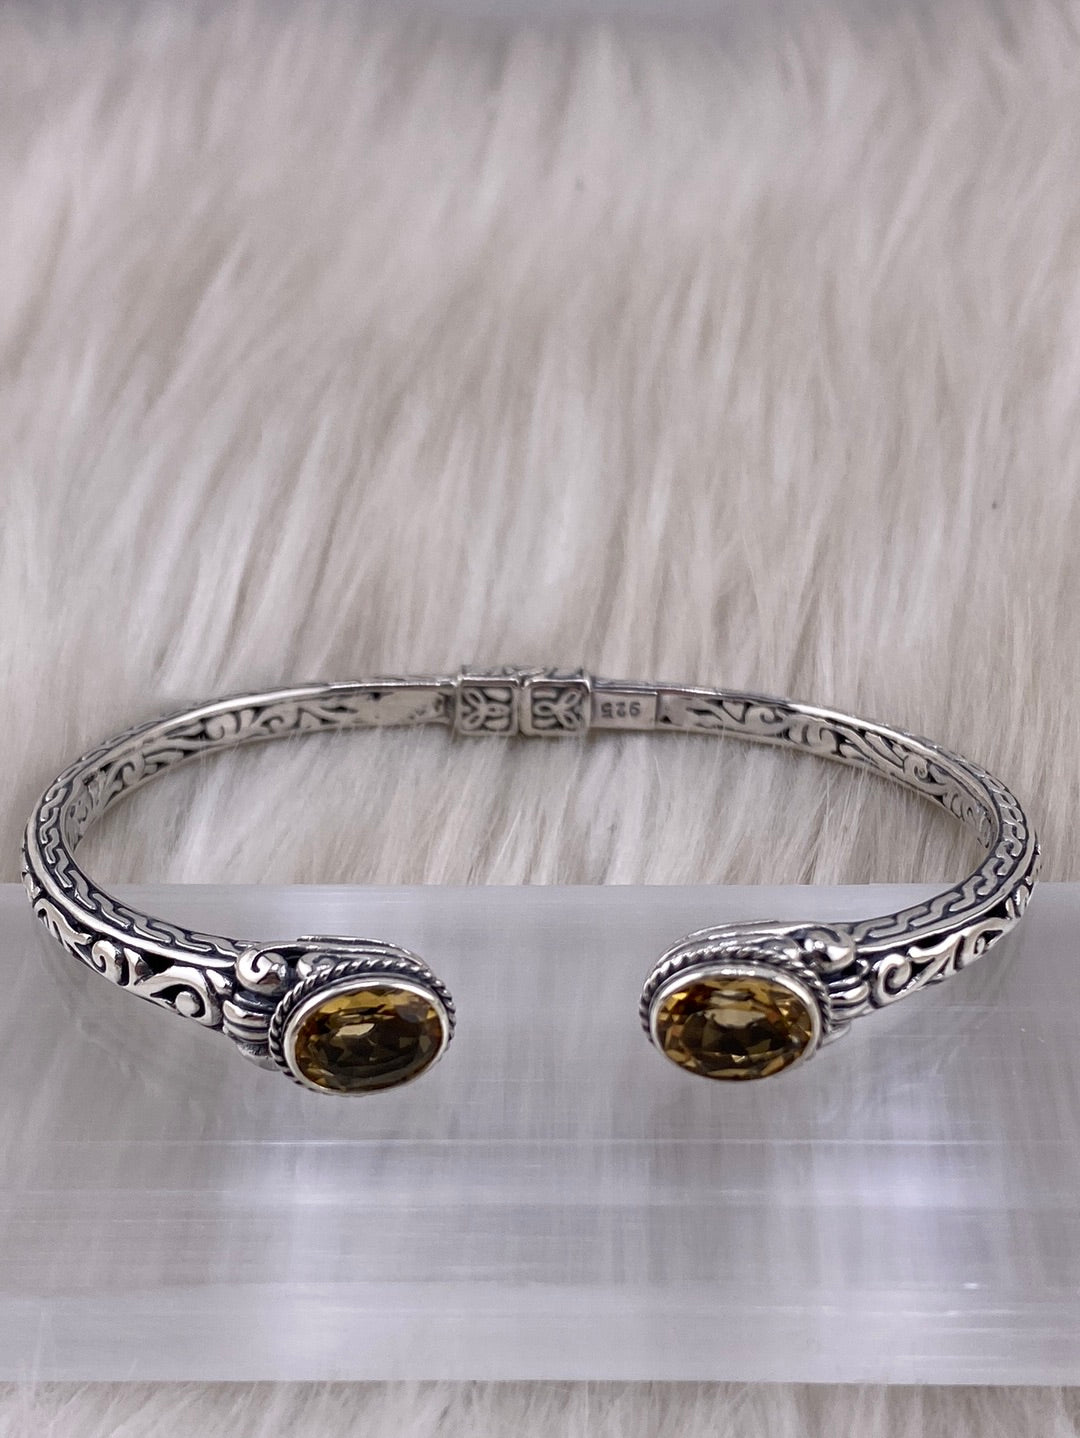 Sterling silver citrine cuff bangle available at wholesale and retail prices, only at our crystal shop in San Diego!